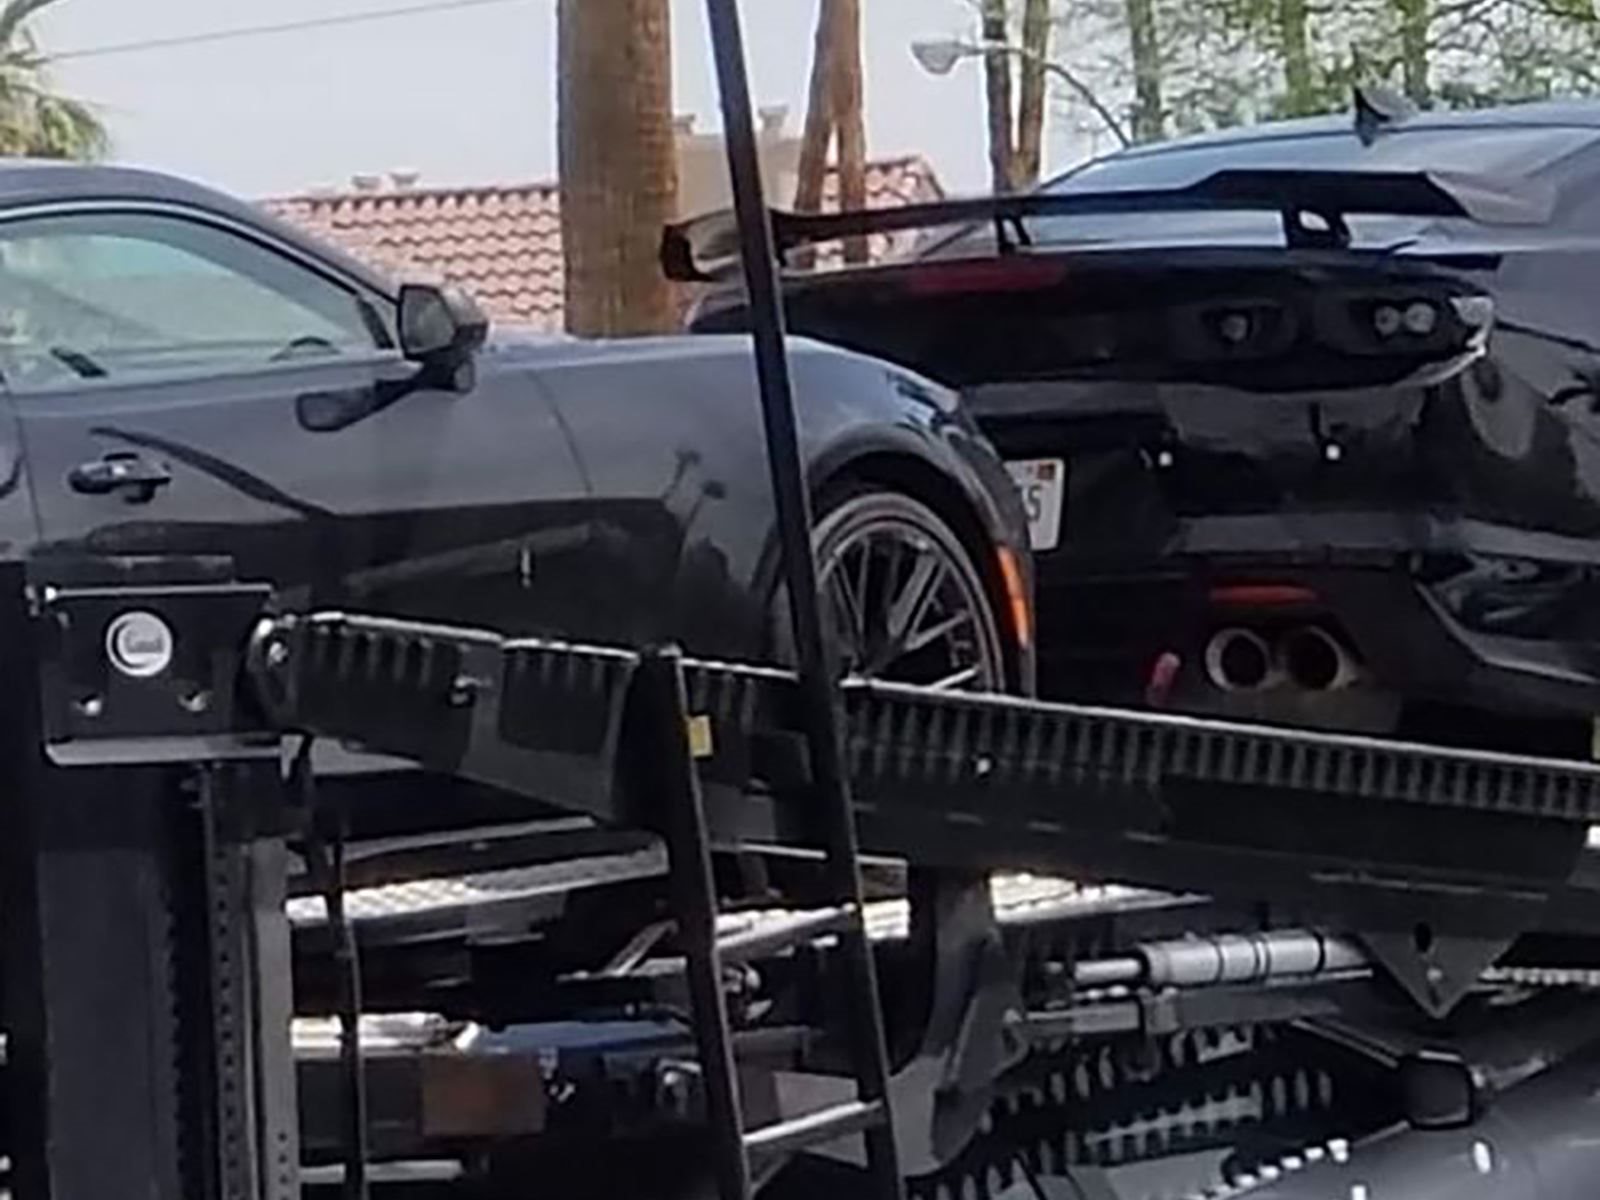 2019 Chevrolet Camaro Zl1 1le Spotted In The Wild Shows New Low